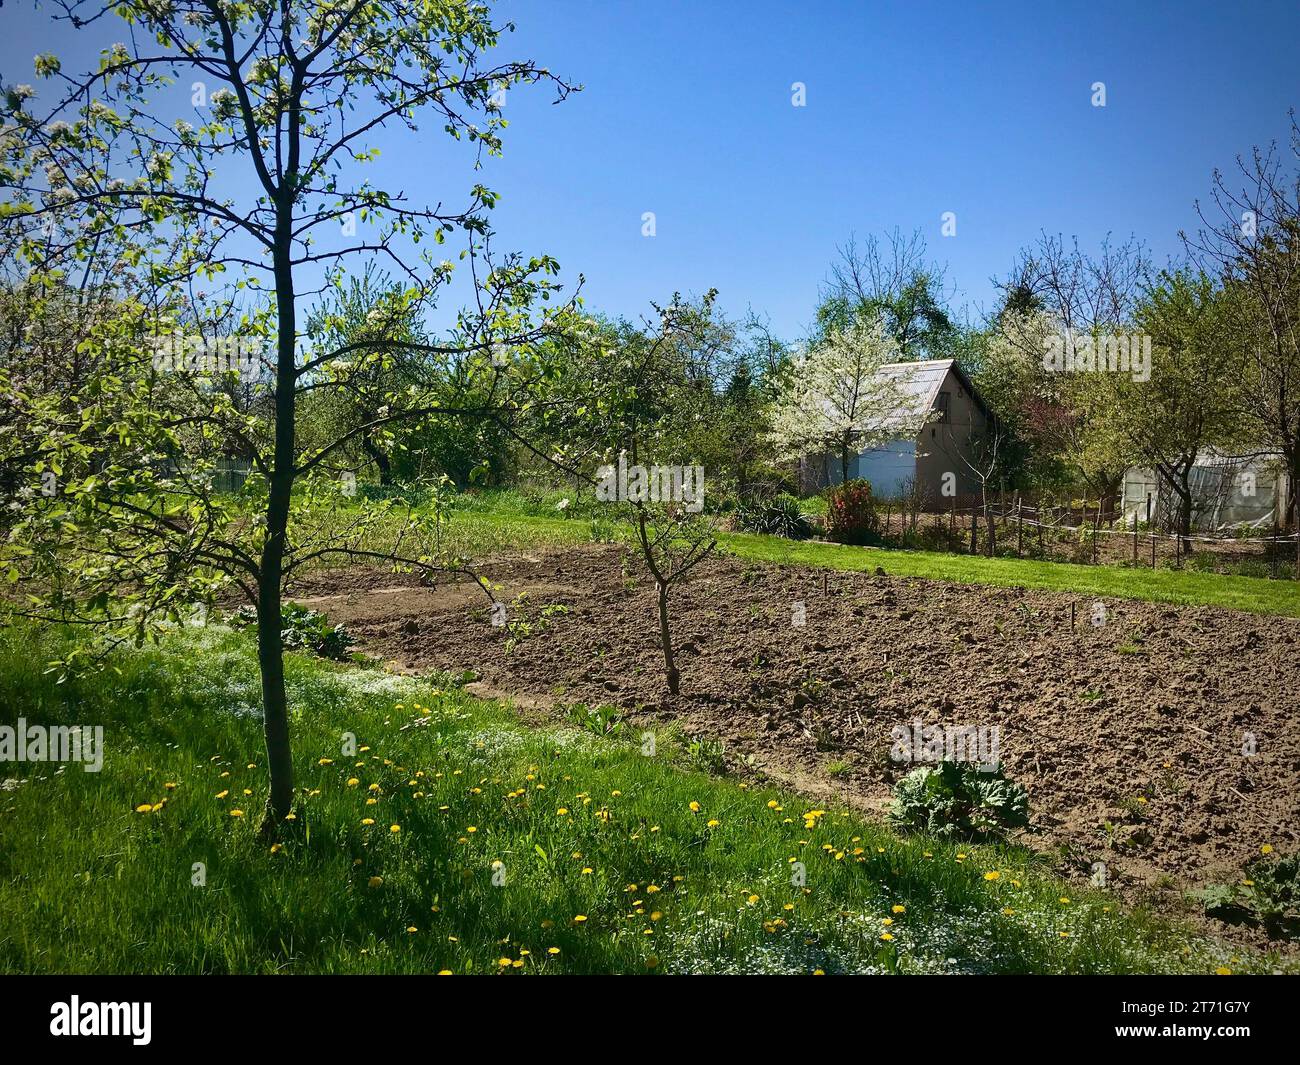 A garden plot with a lot of trees and a partition house in the distance. Stock Photo